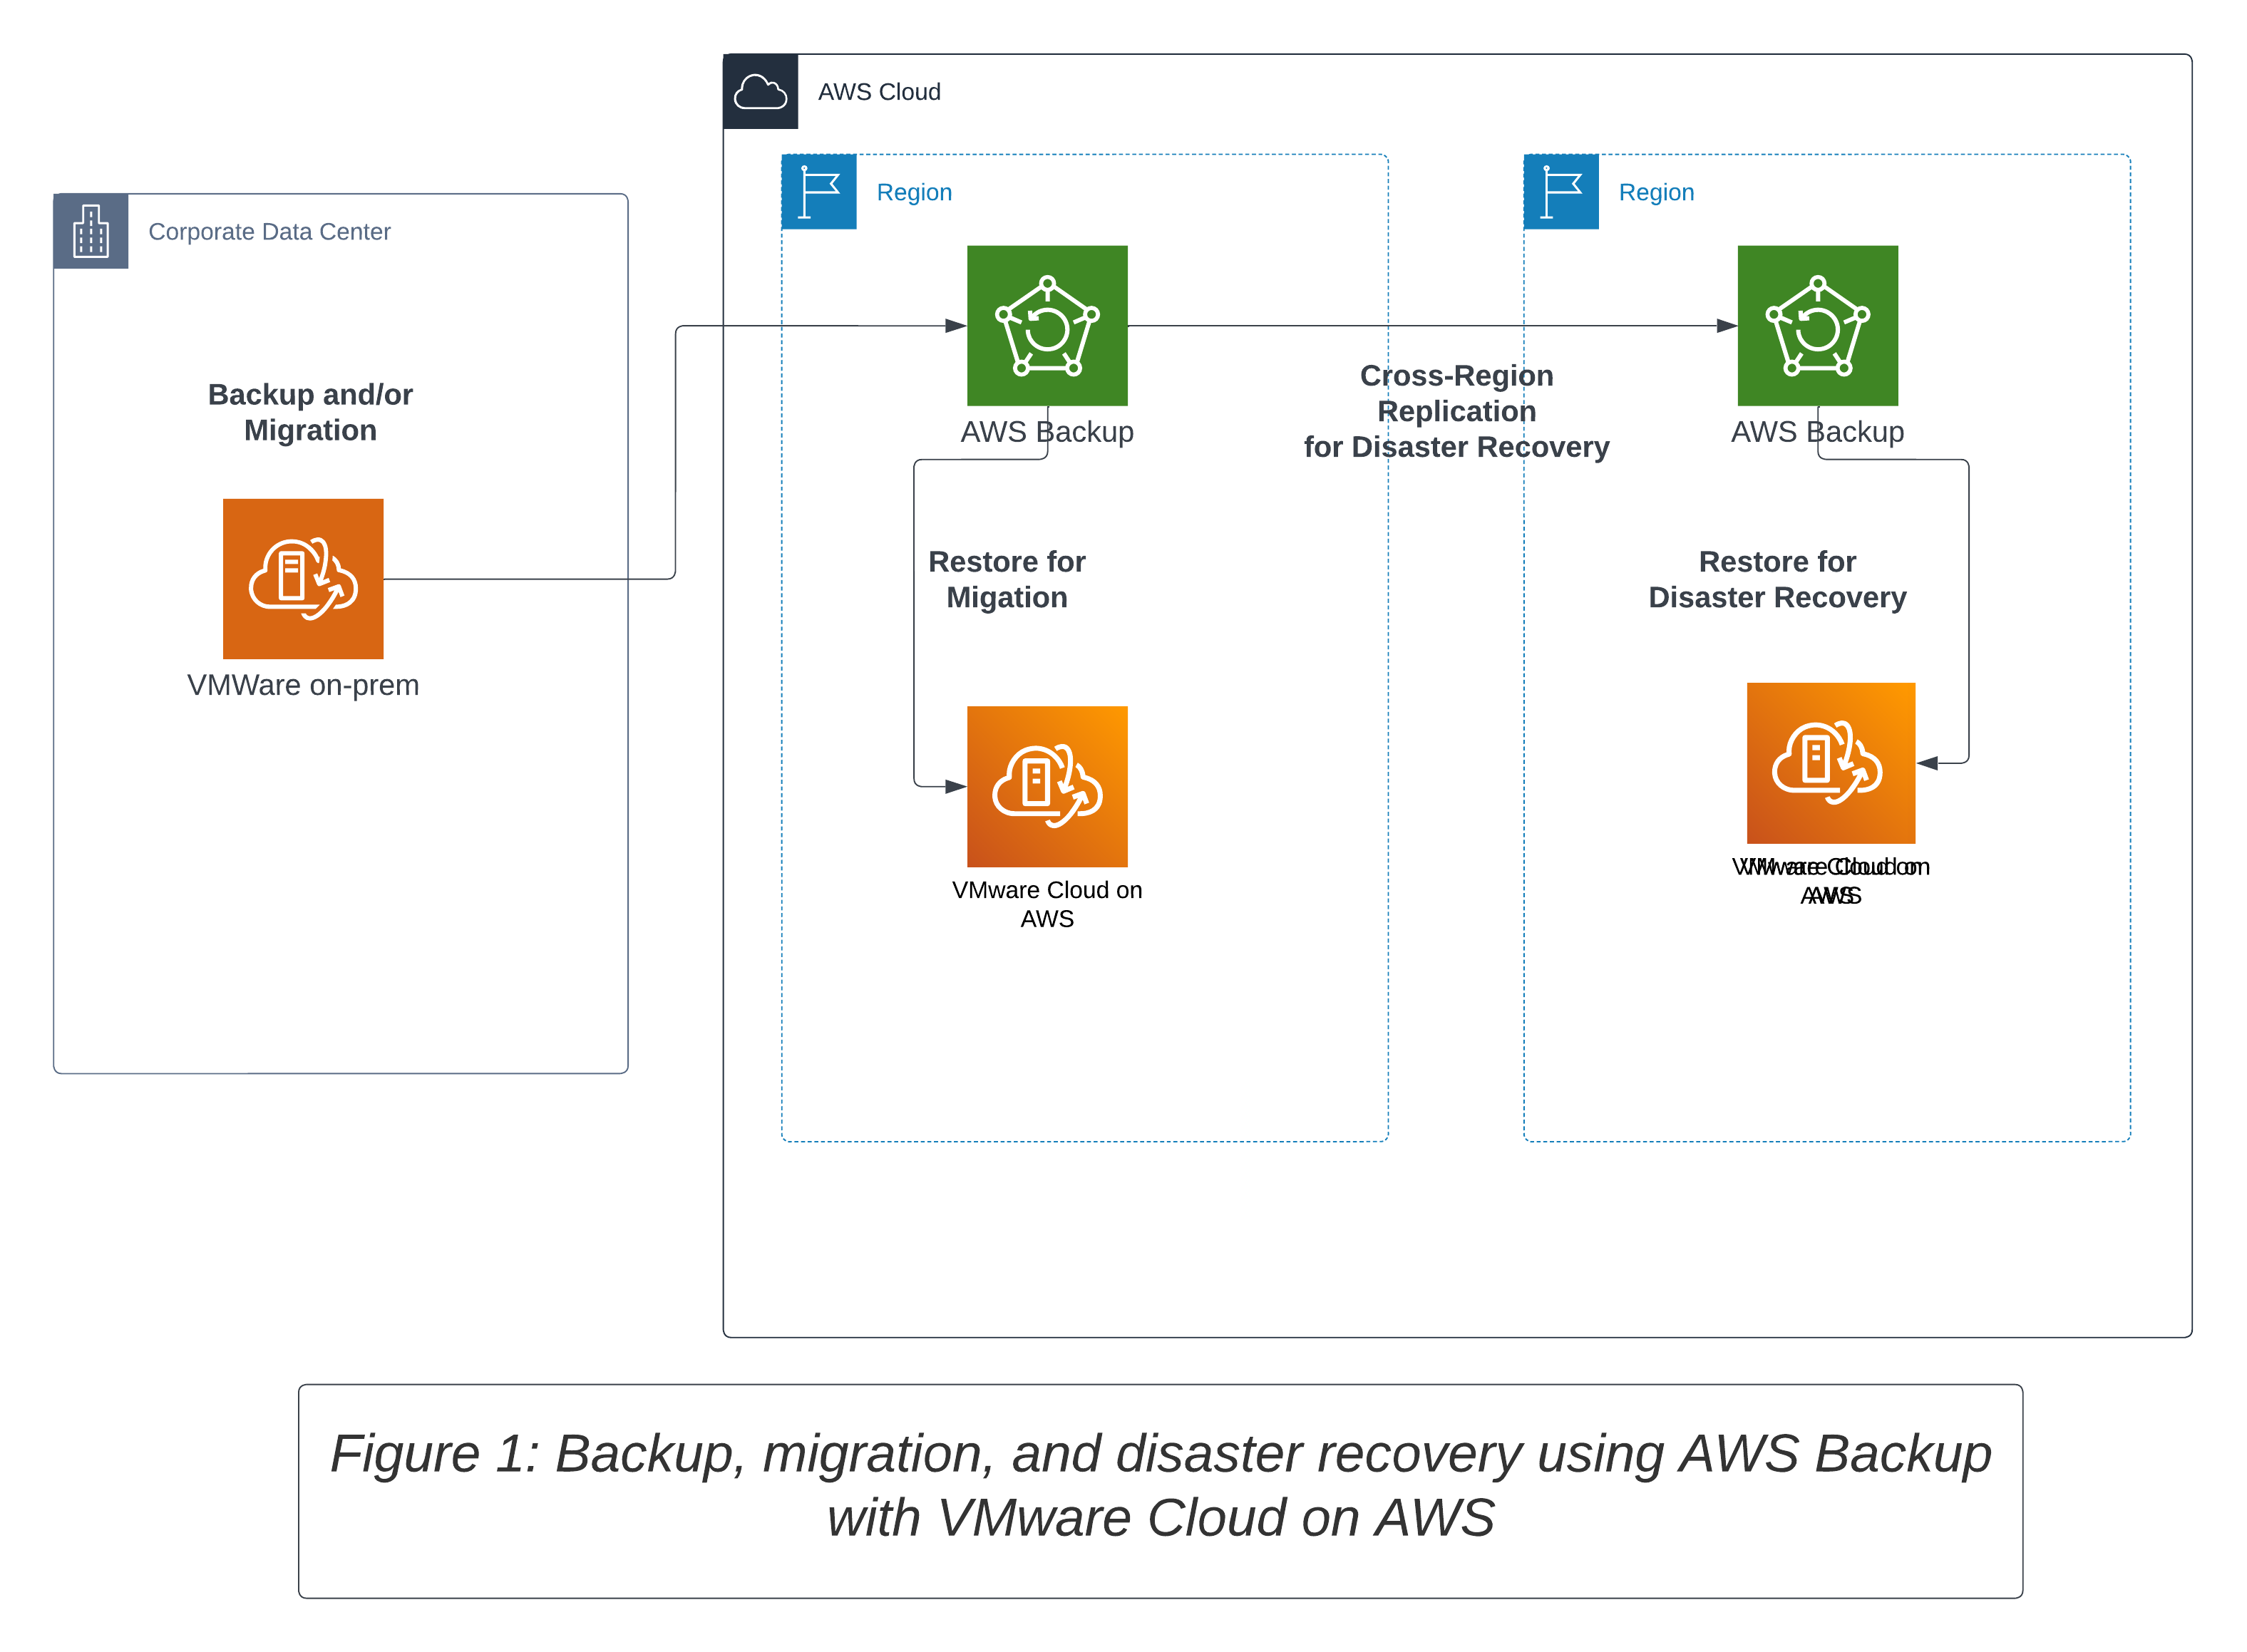 Backup and Migration of VMware with AWS